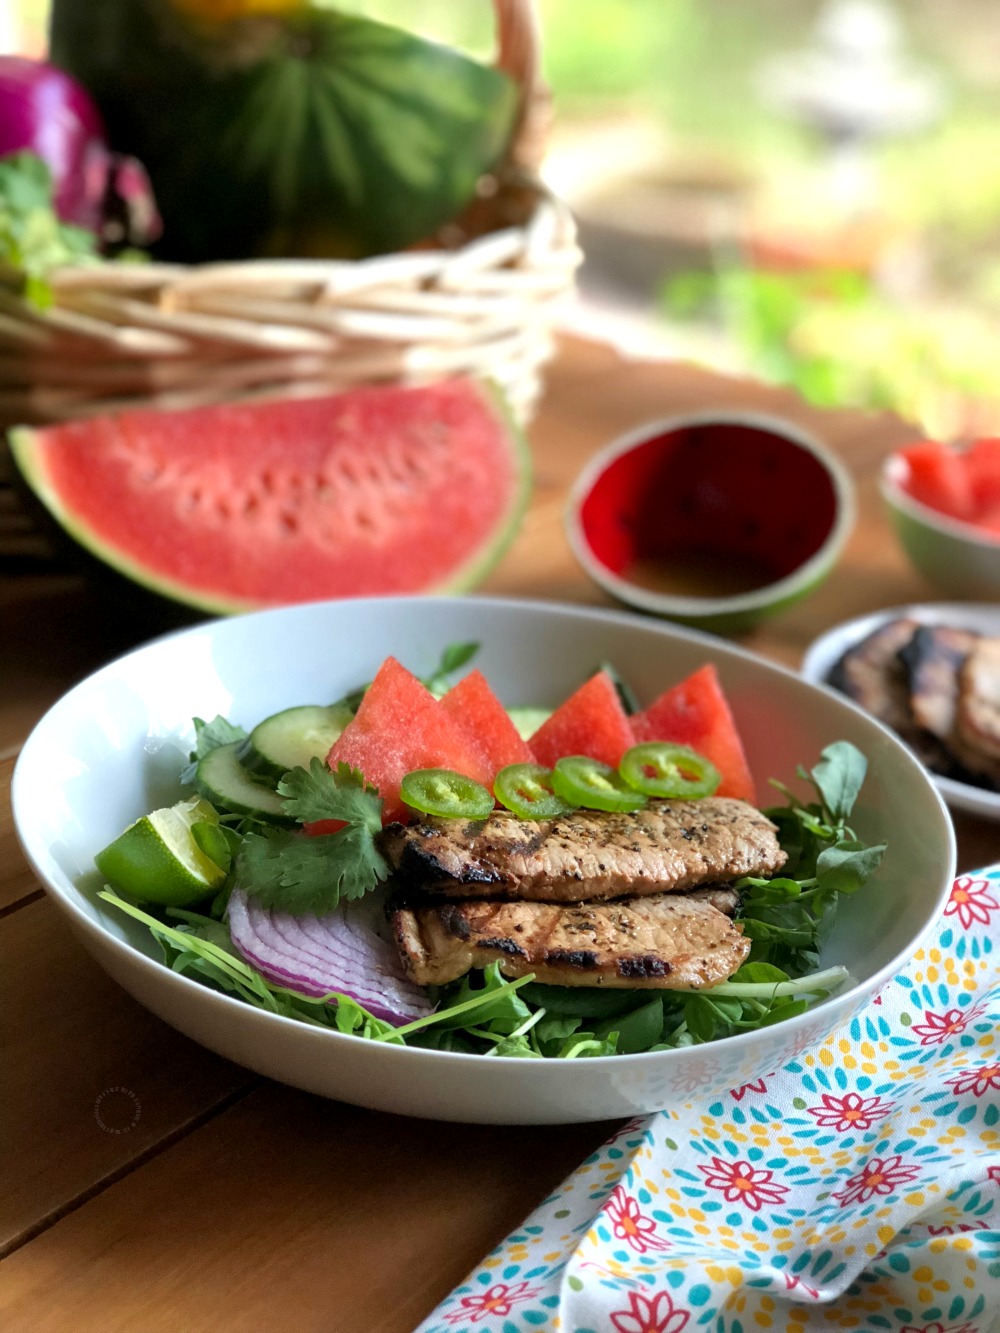 The watermelon salad with grilled pork chops is a complete meal ready in a few minutes